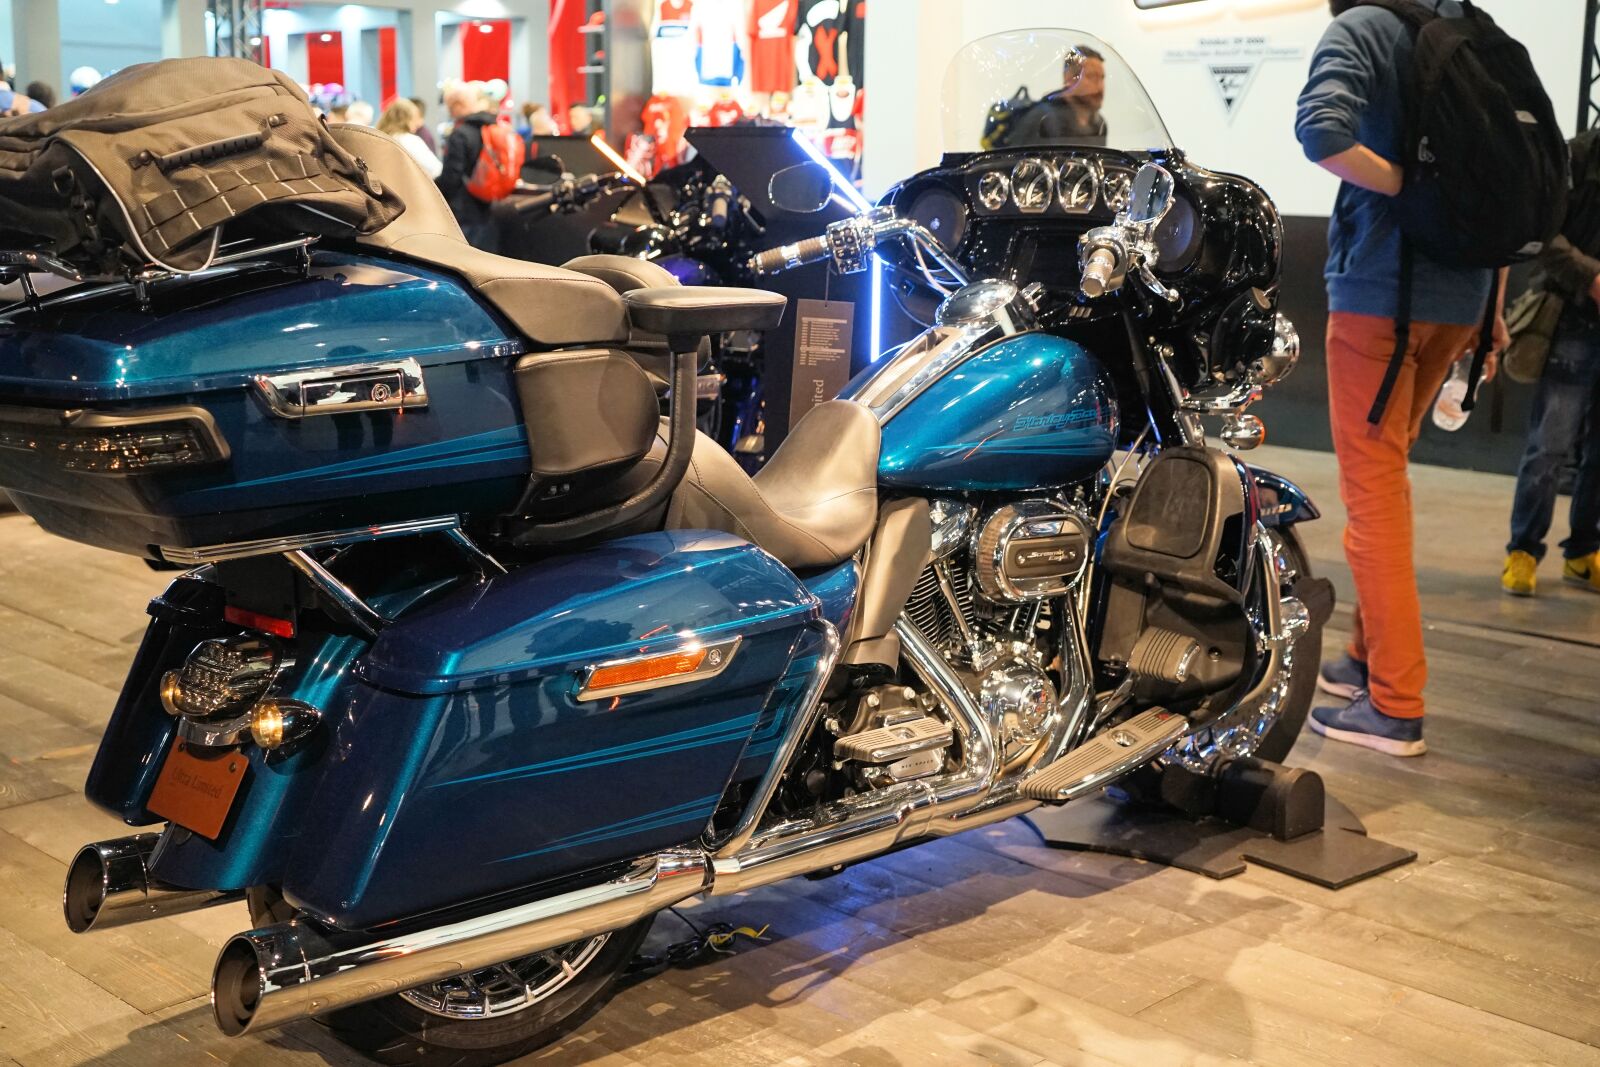 Sony a7 II sample photo. Indian, eicma, motorcycle photography